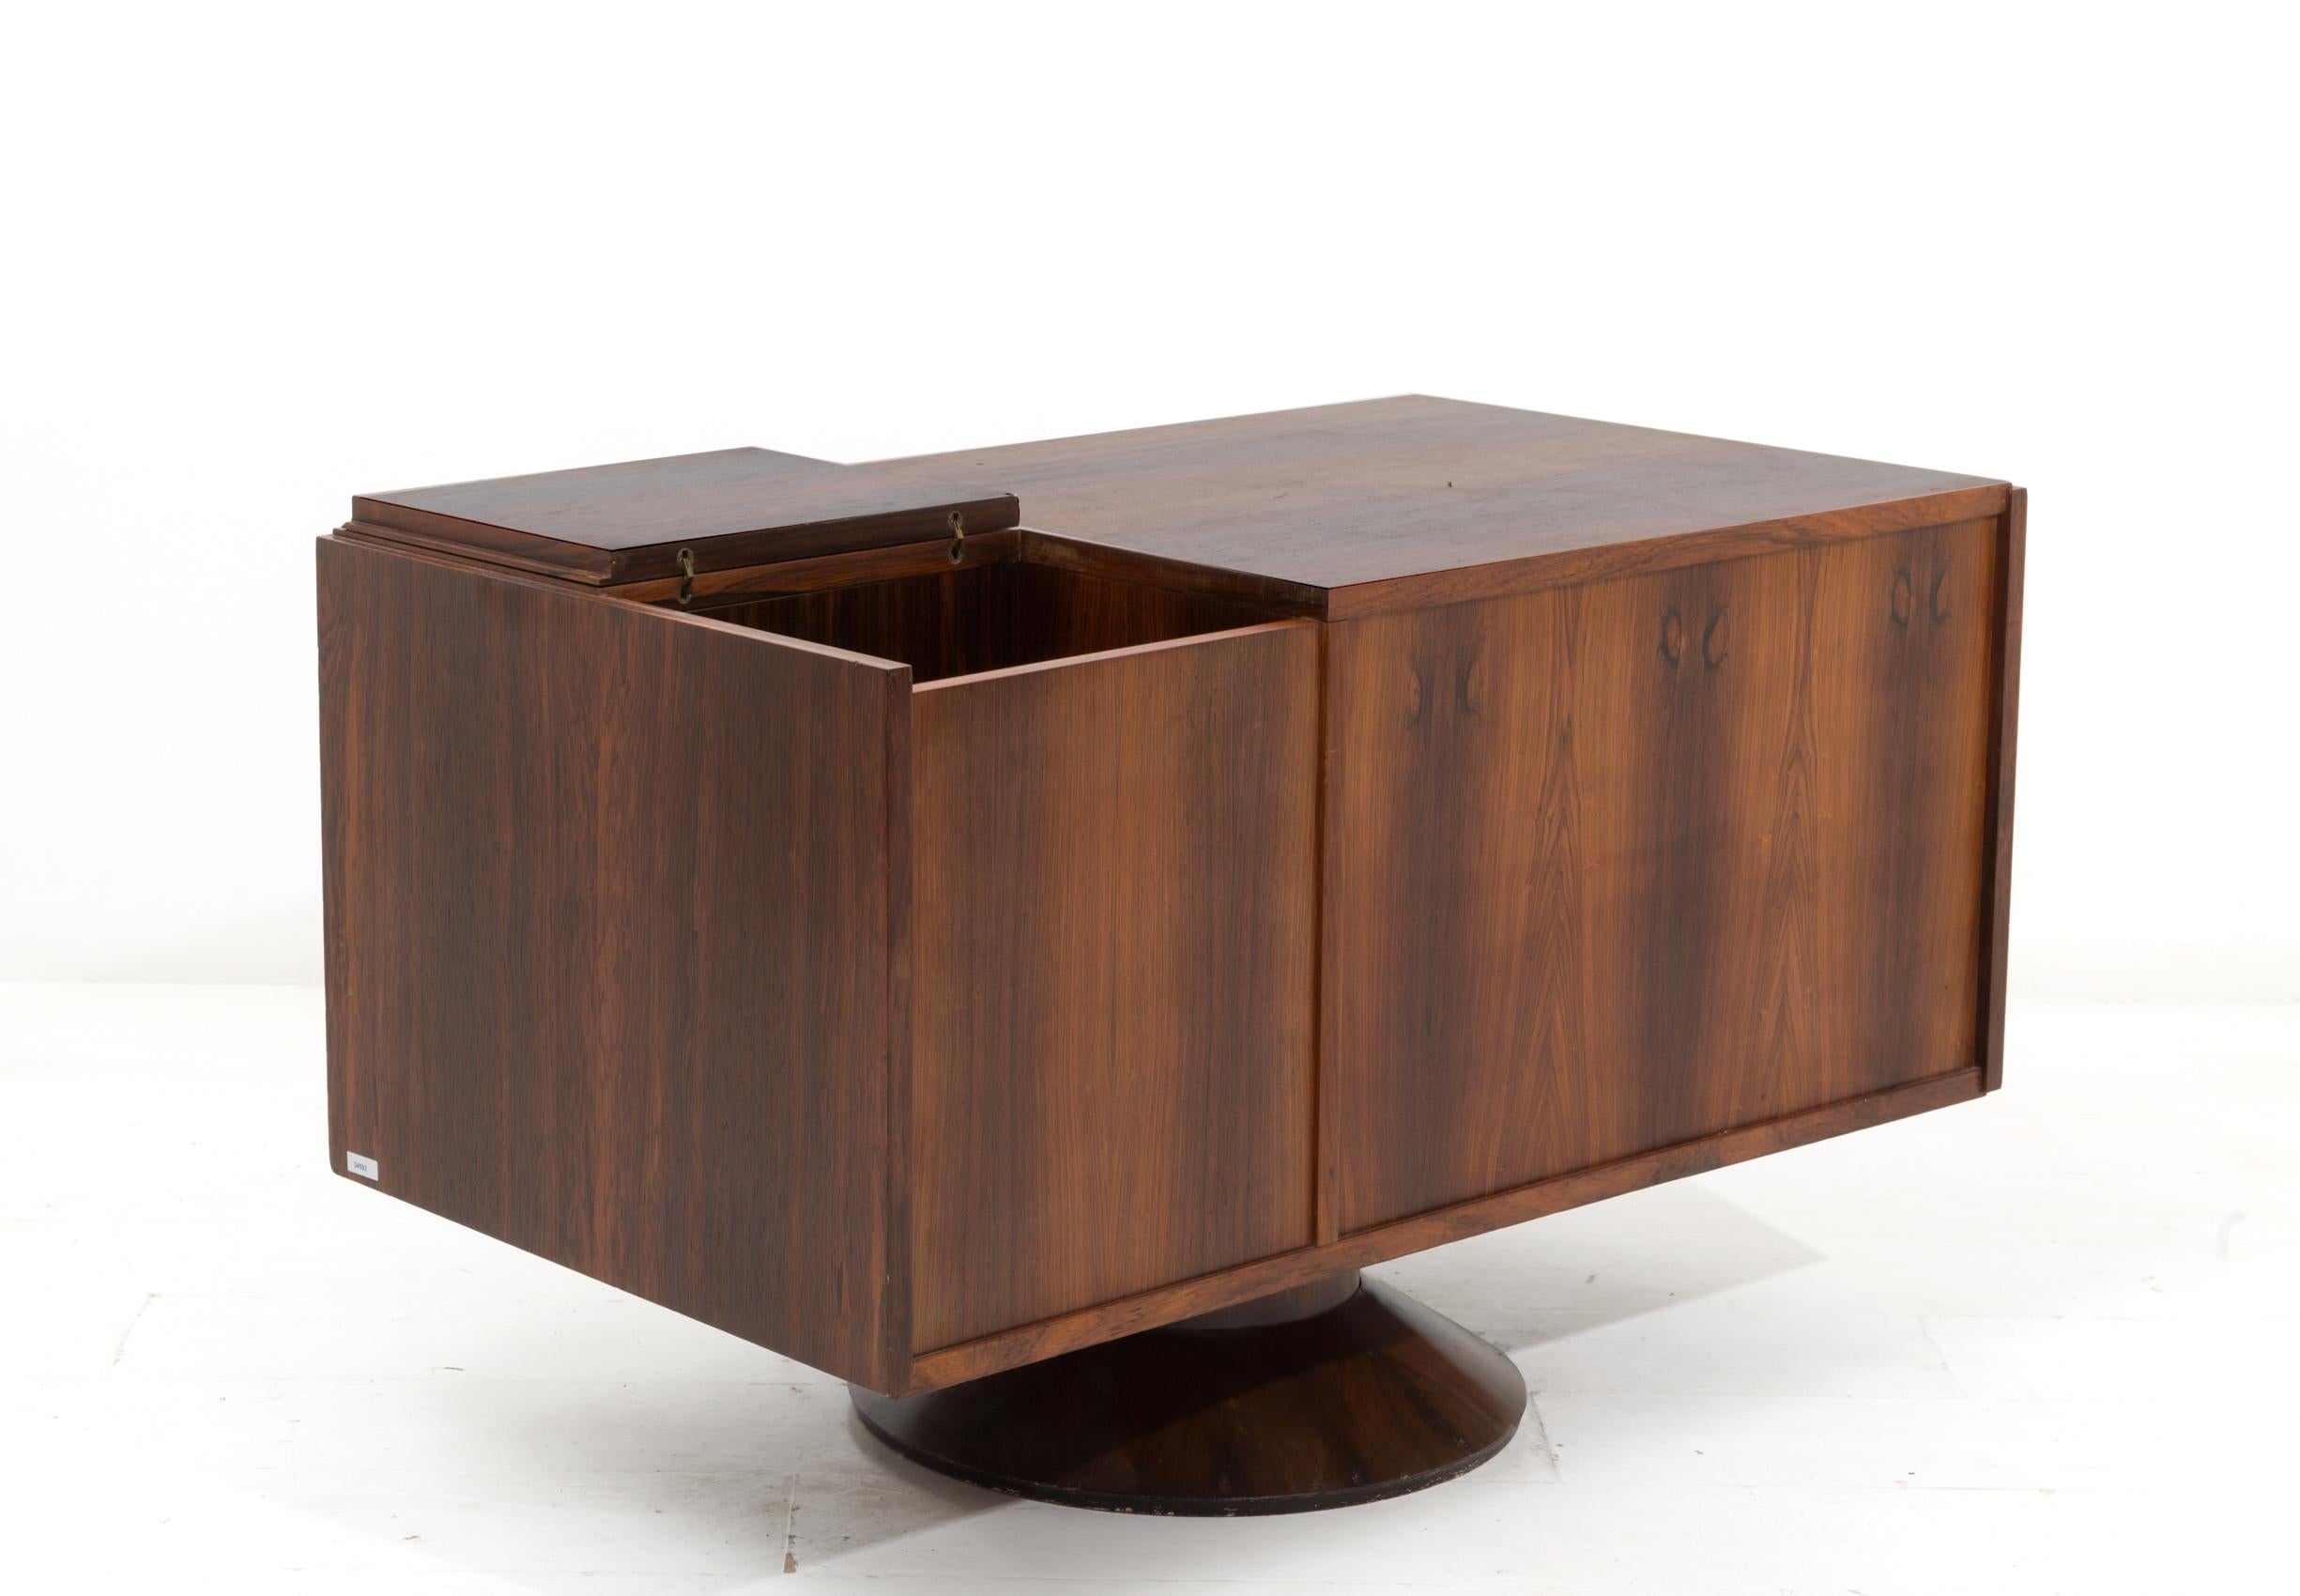 Eccentric swivel bar cabinet from the Italian centre of the 1950s, designed by Gianfranco Frattini for Bernini. The cabinet is made of precious woods. The peculiarity of the cabinet is its swivel pedestal that with its mechanism allows the cabinet